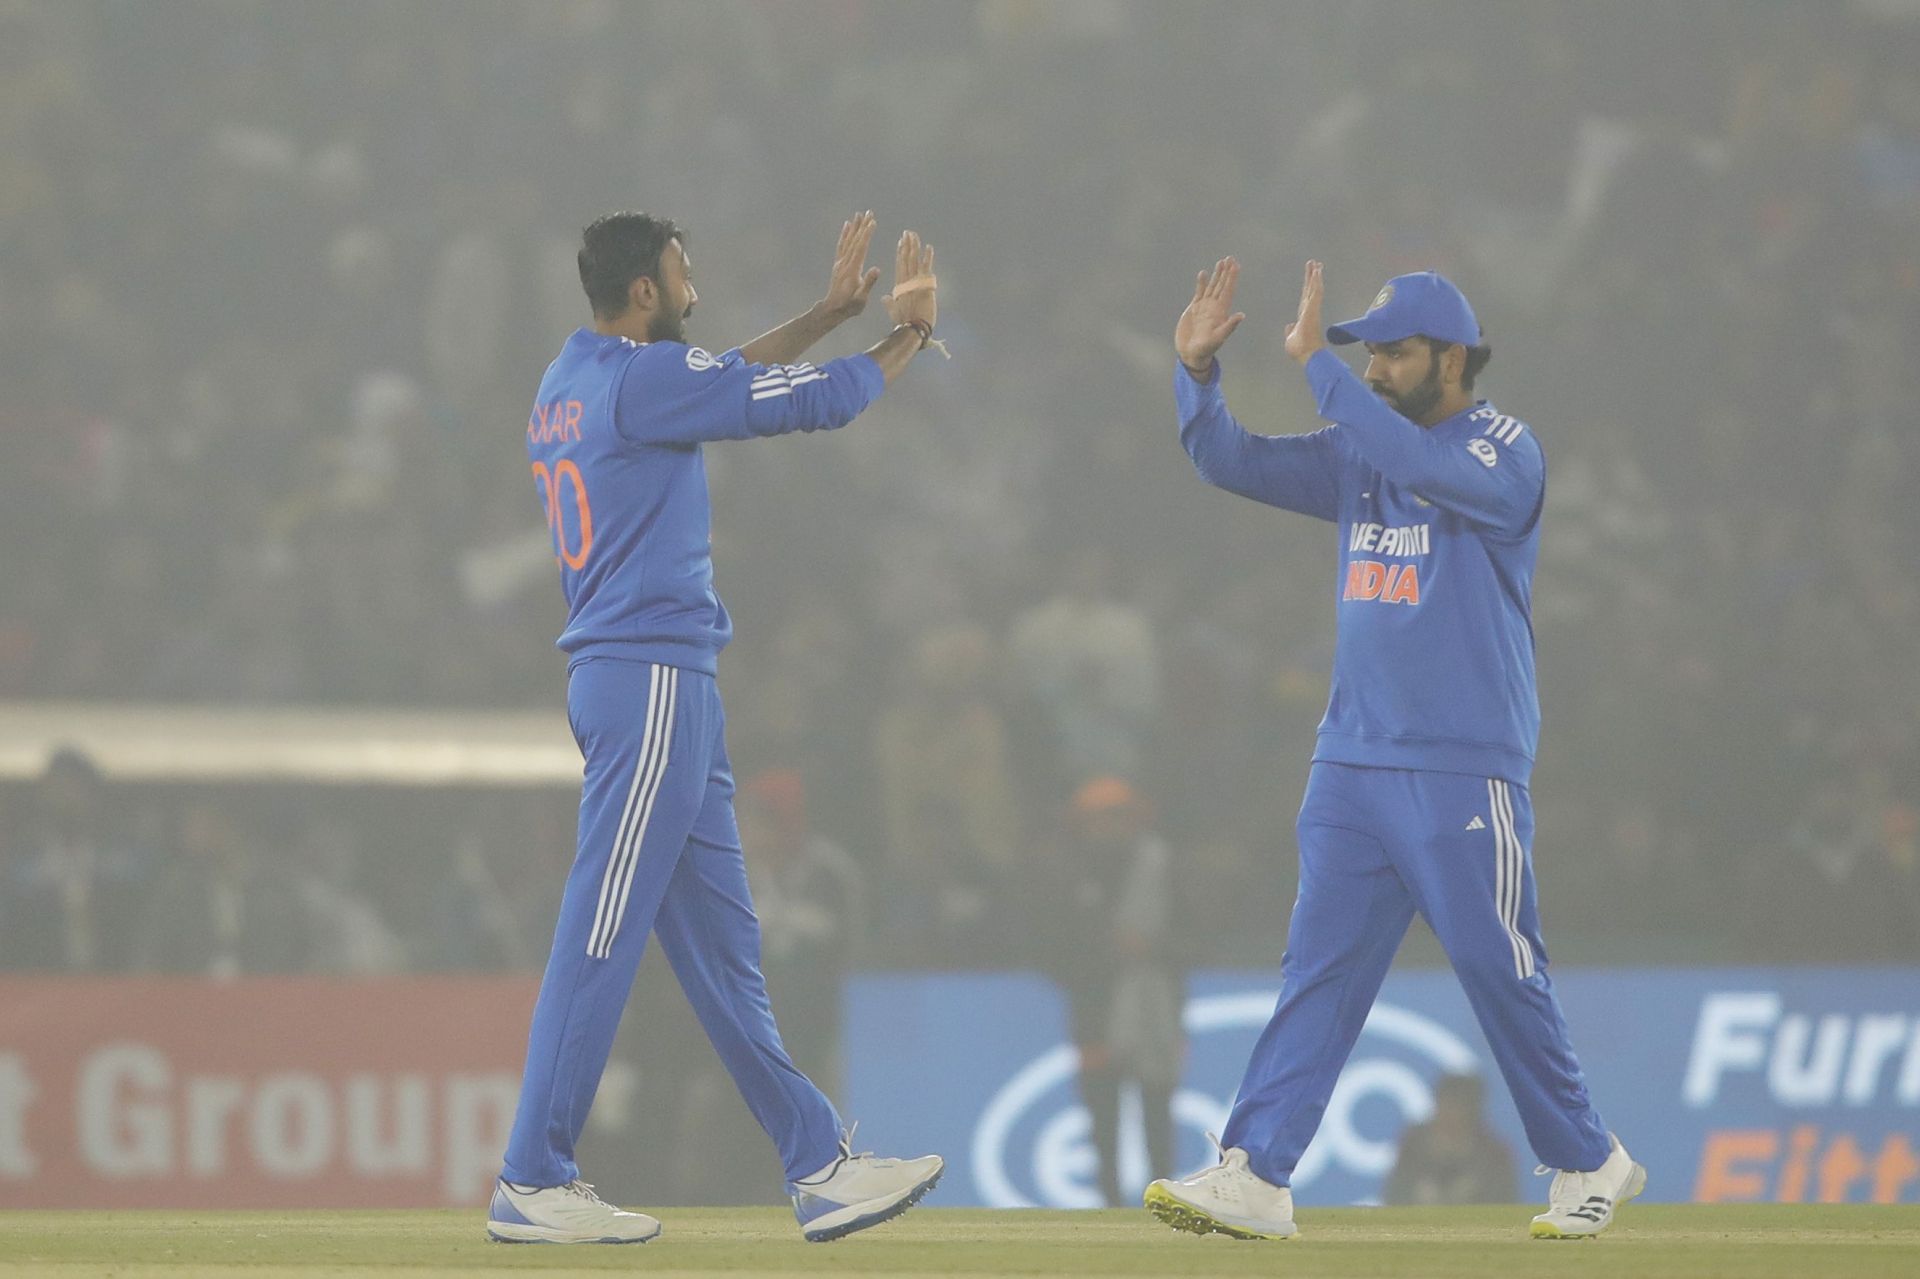 Axar Patel picked up two wickets in an impressive spell